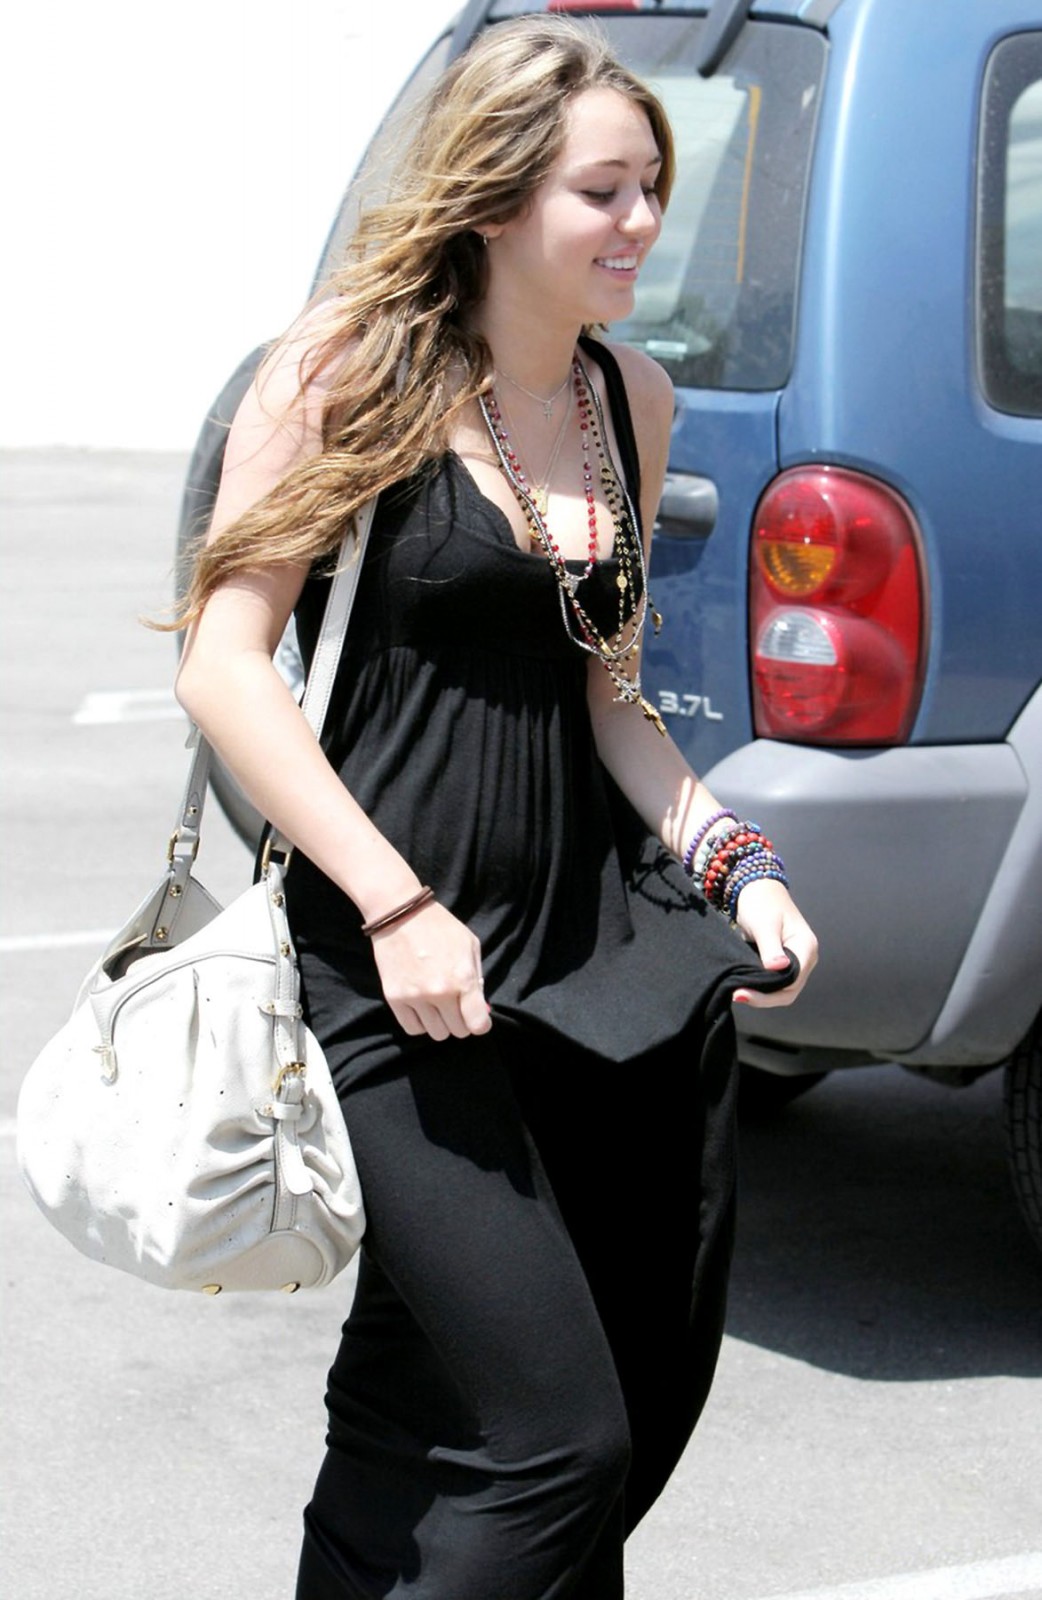 Miley-Cyrus-20090831_Out-n-About-Studio-City_May09_14891-1042x1600.jpg